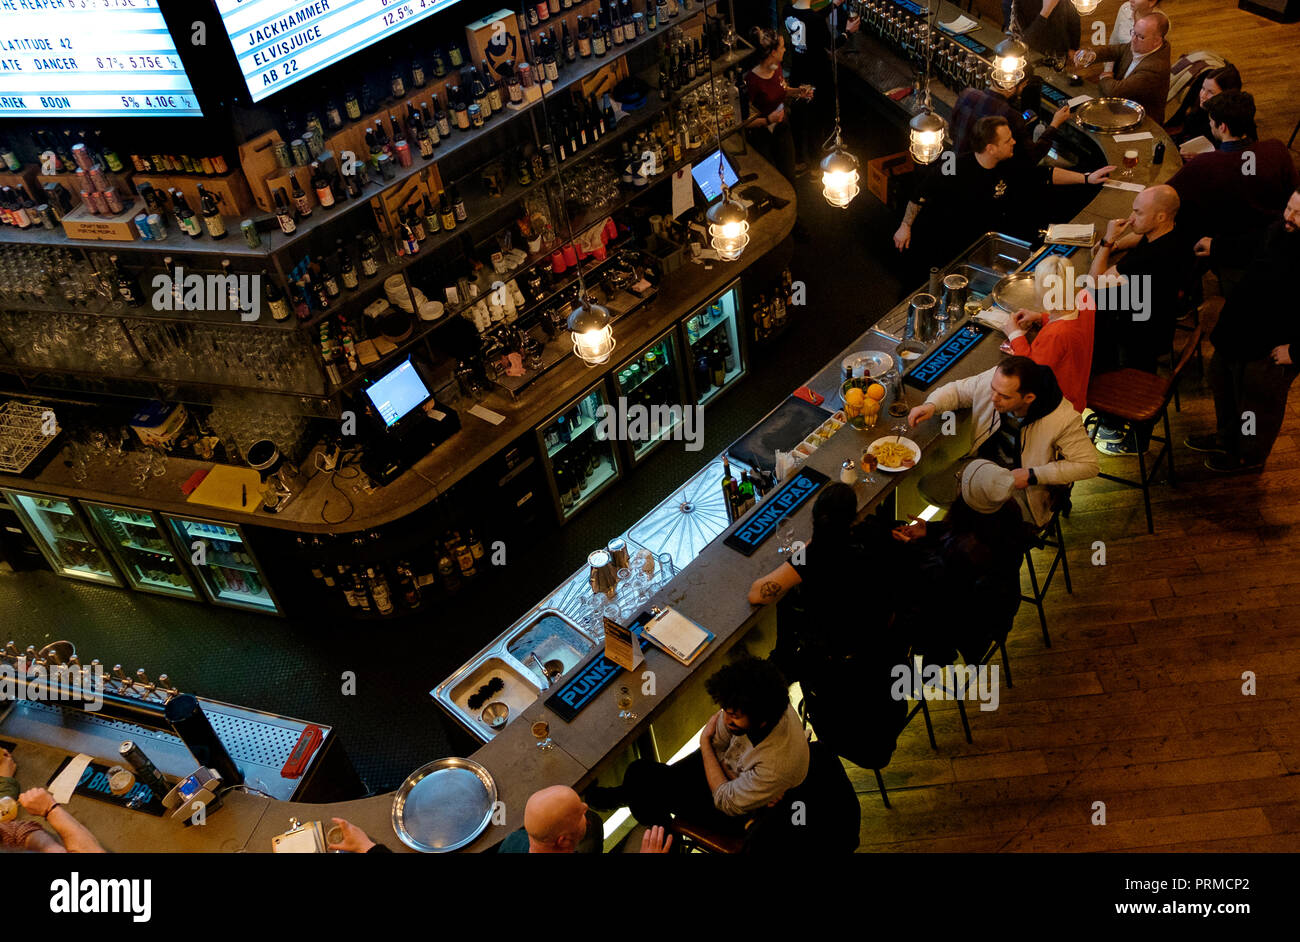 Interior of the Brewdog bar in the centre of Brussels Stock Photo